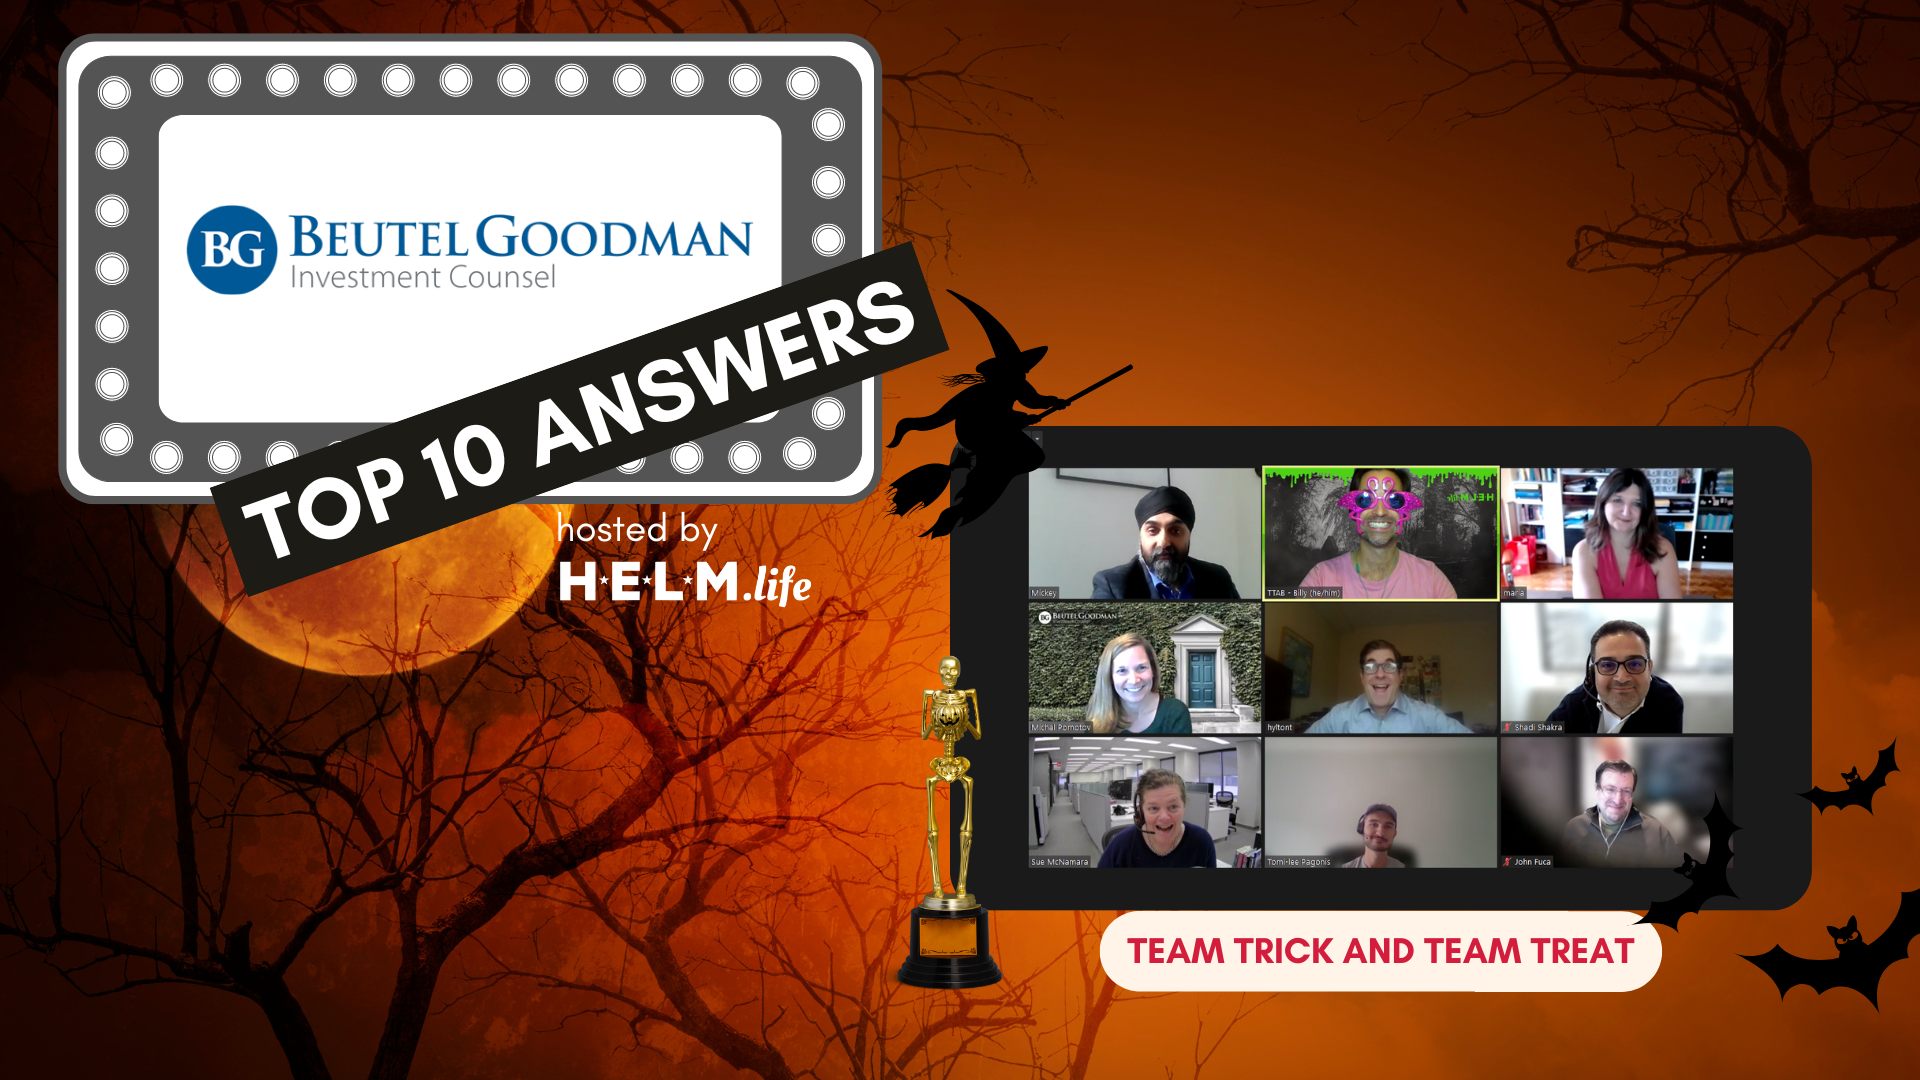 Top 10 Answers Team on Zoom